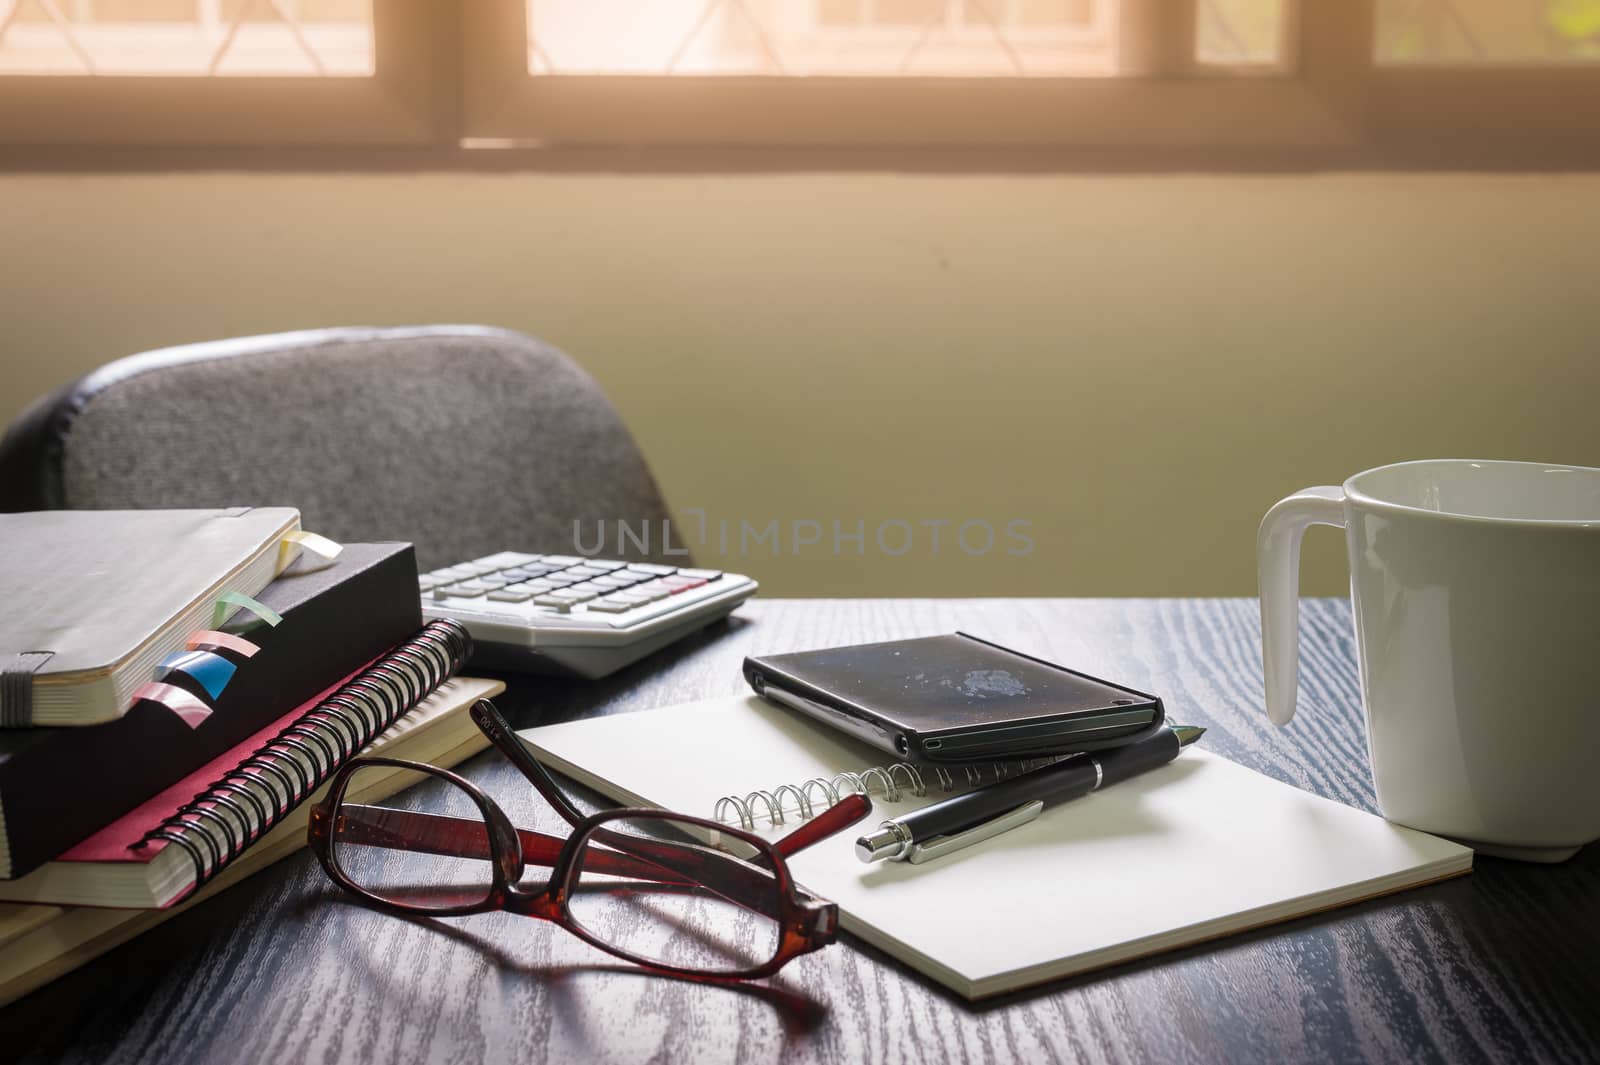 Smartphone put down on table beside notebooks and pen in morning time on work day. Business working at home concept